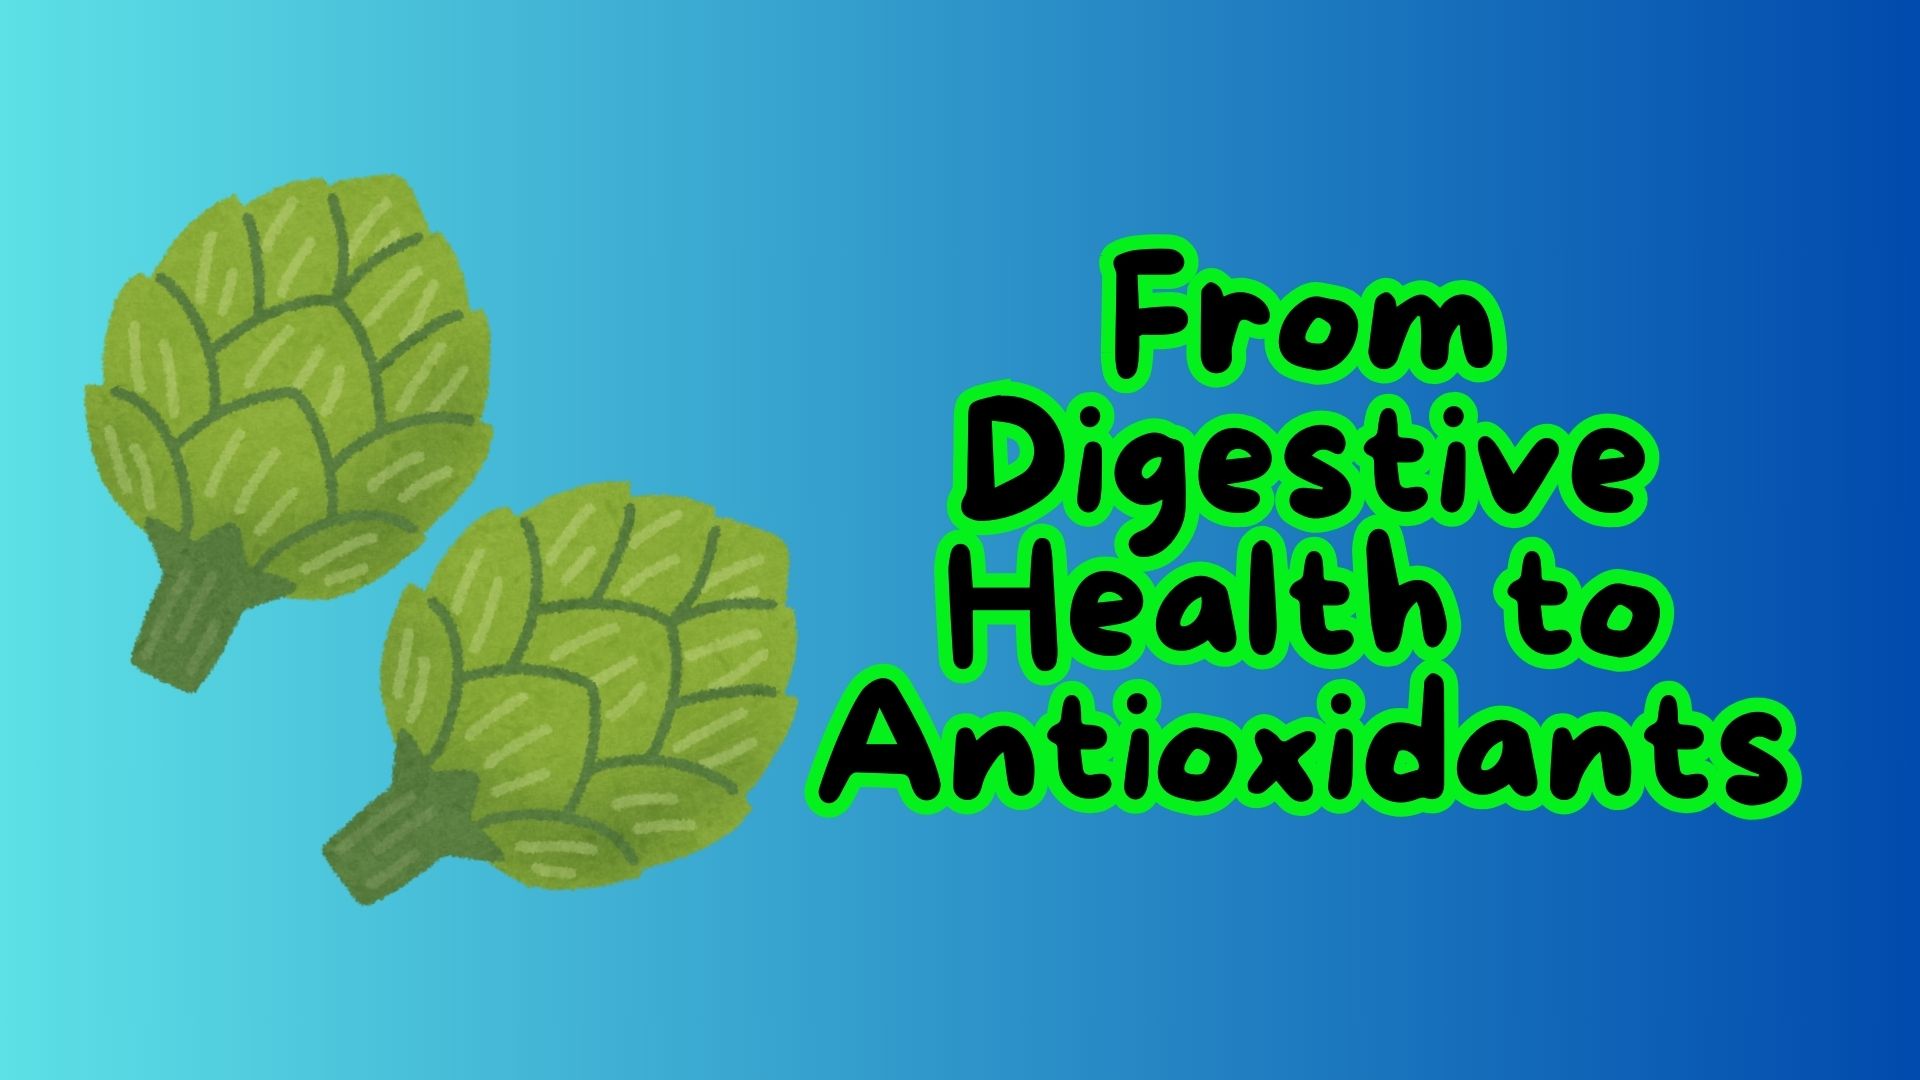 From Digestive Health to Antioxidants